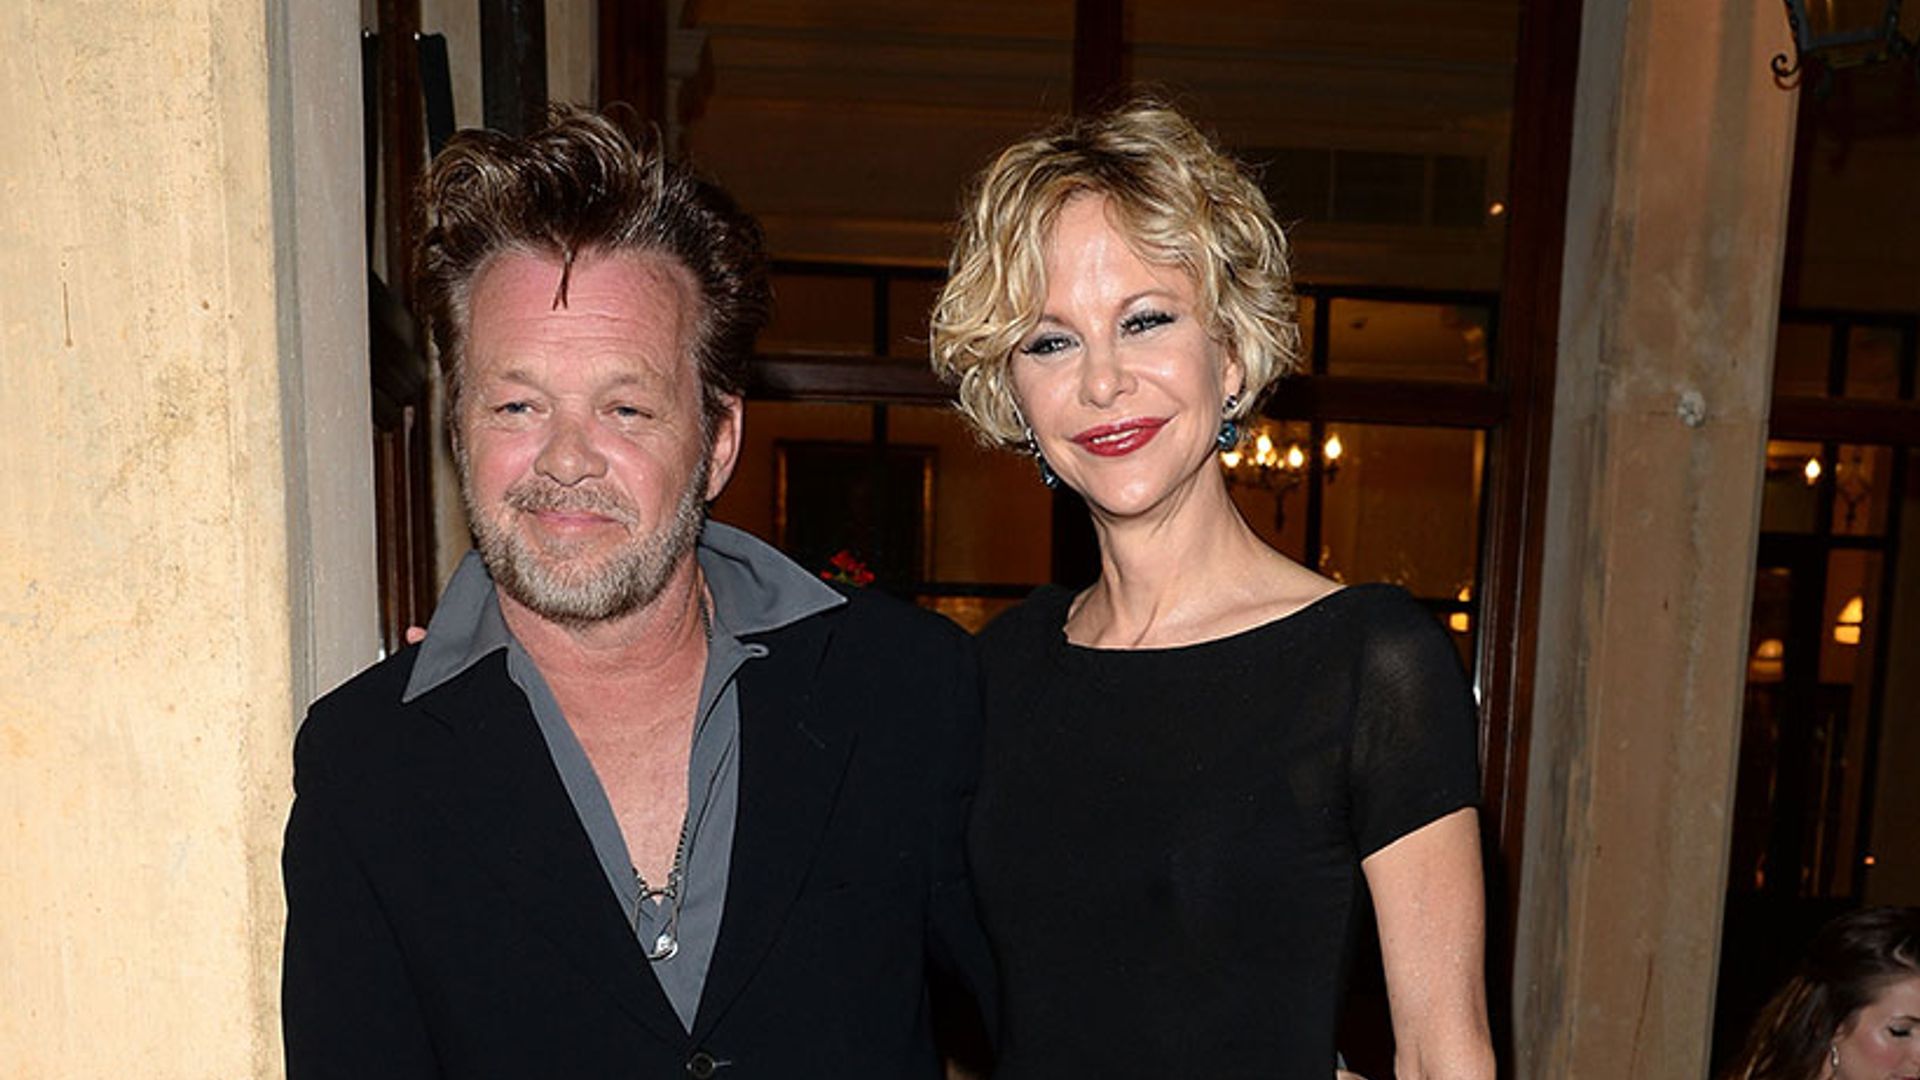 John Mellencamp on his relationship with Meg Ryan: 'She hates me to death'